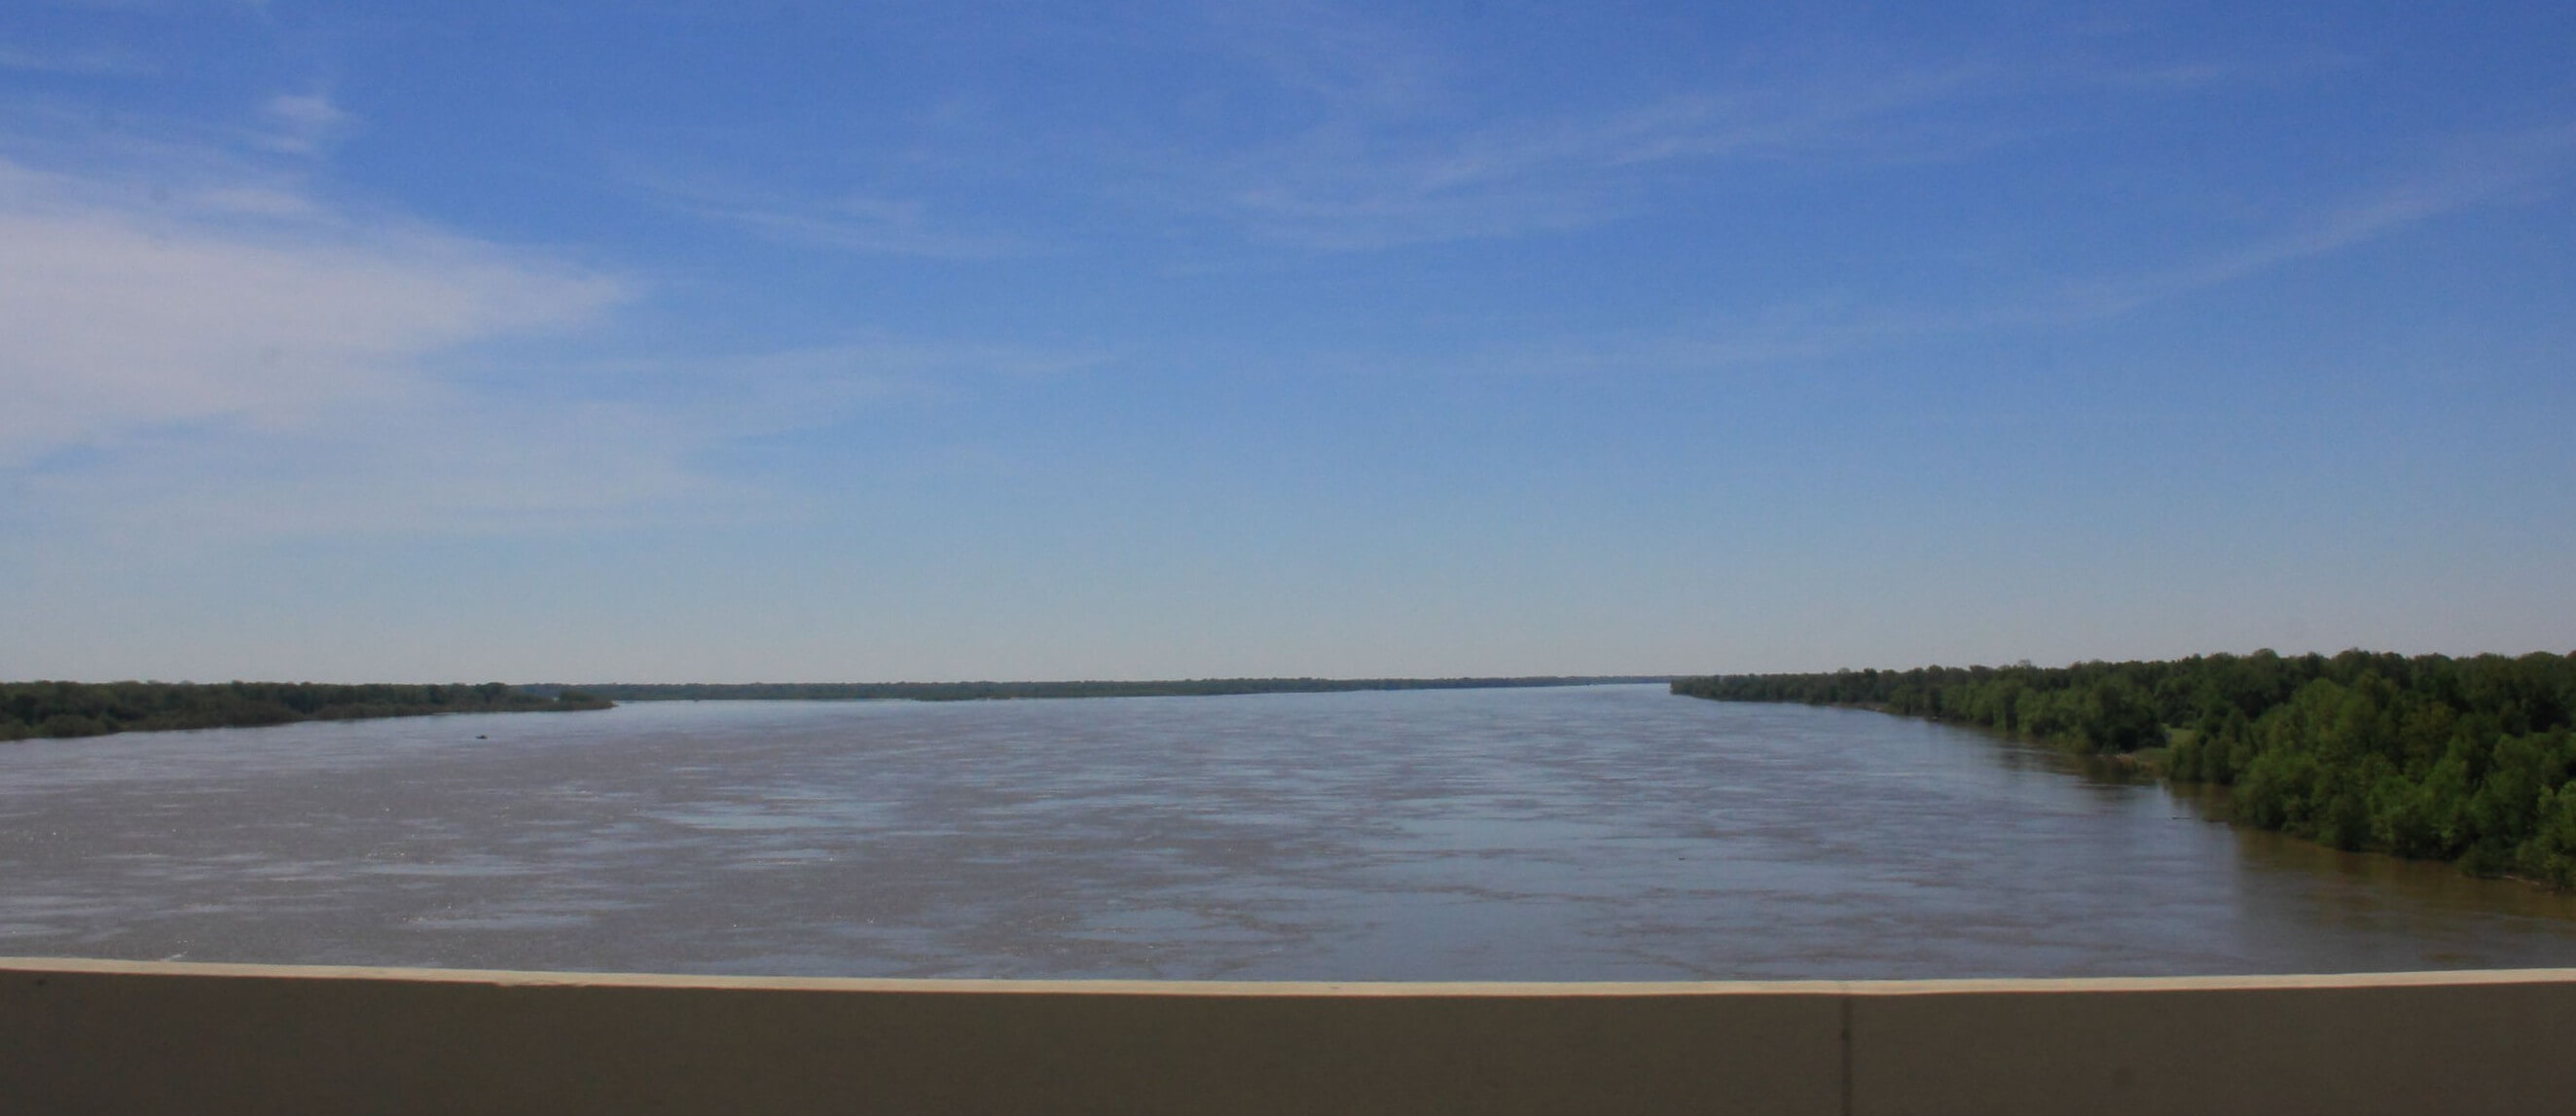 Crossing the Mighty Mississippi. Photo by Bruce Beehler